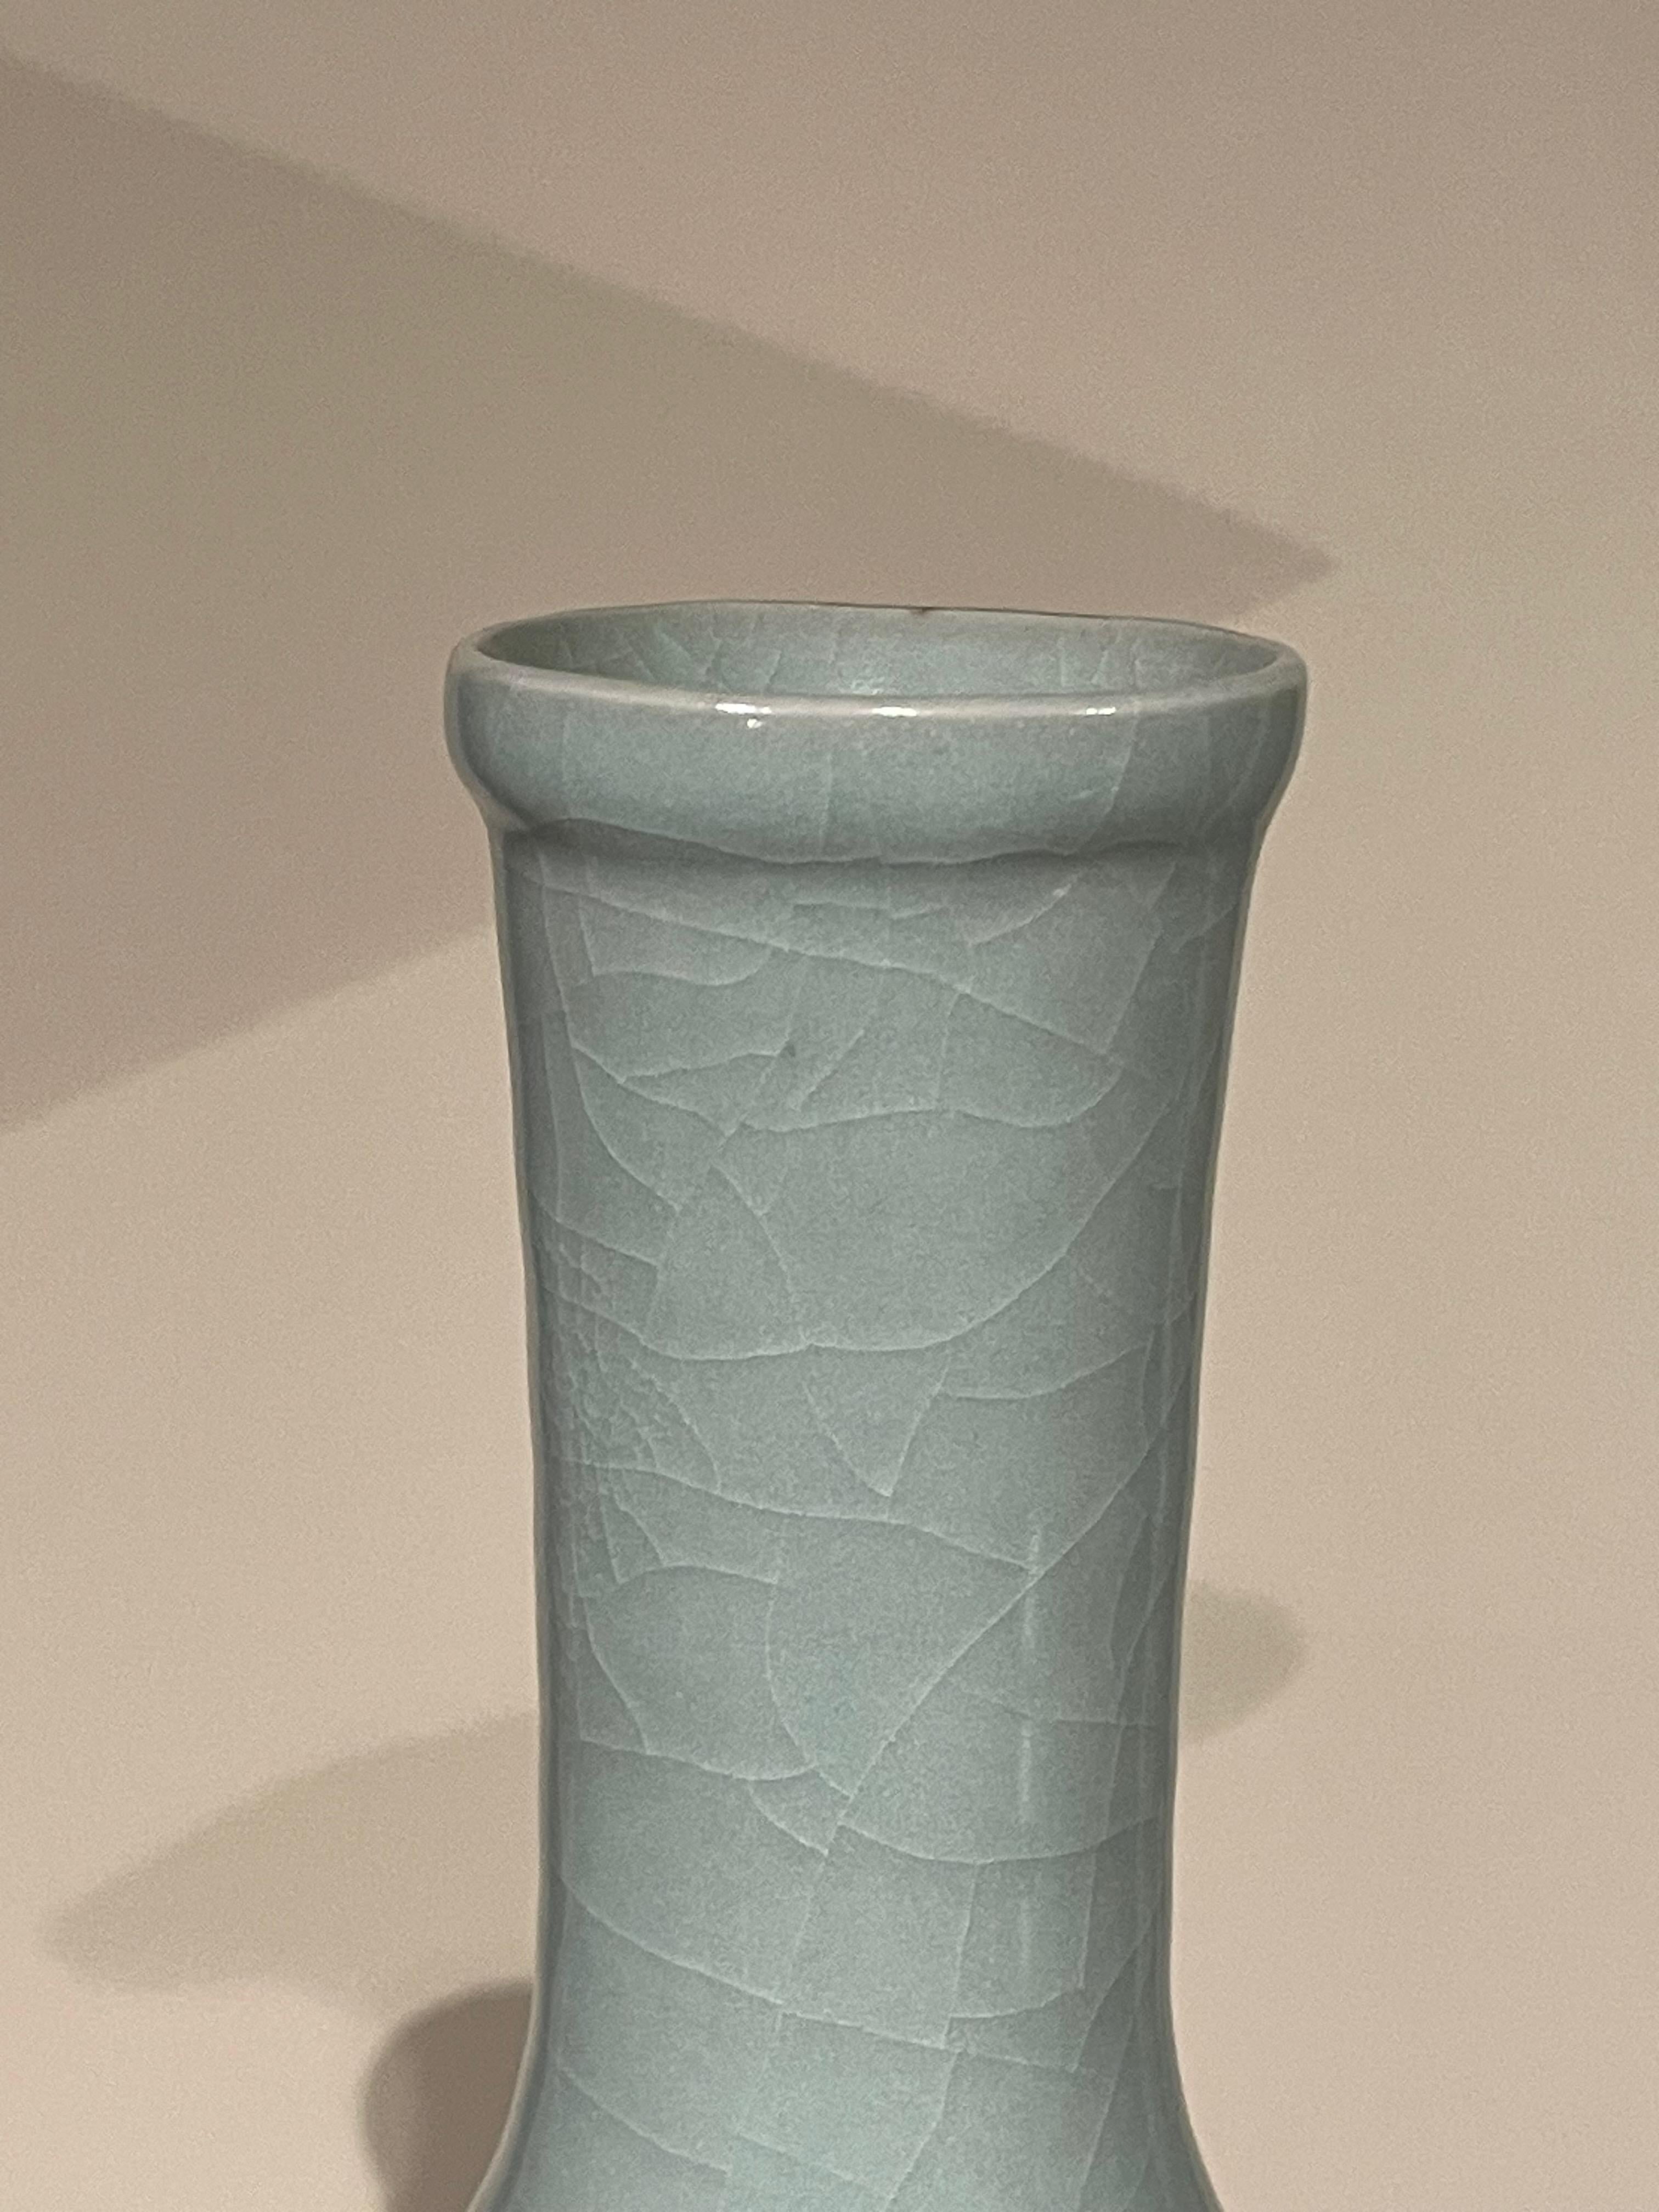 Contemporary Chinese pale turquoise vase.
Funnel neck design.
Large collection available with varying sizes and shapes.
